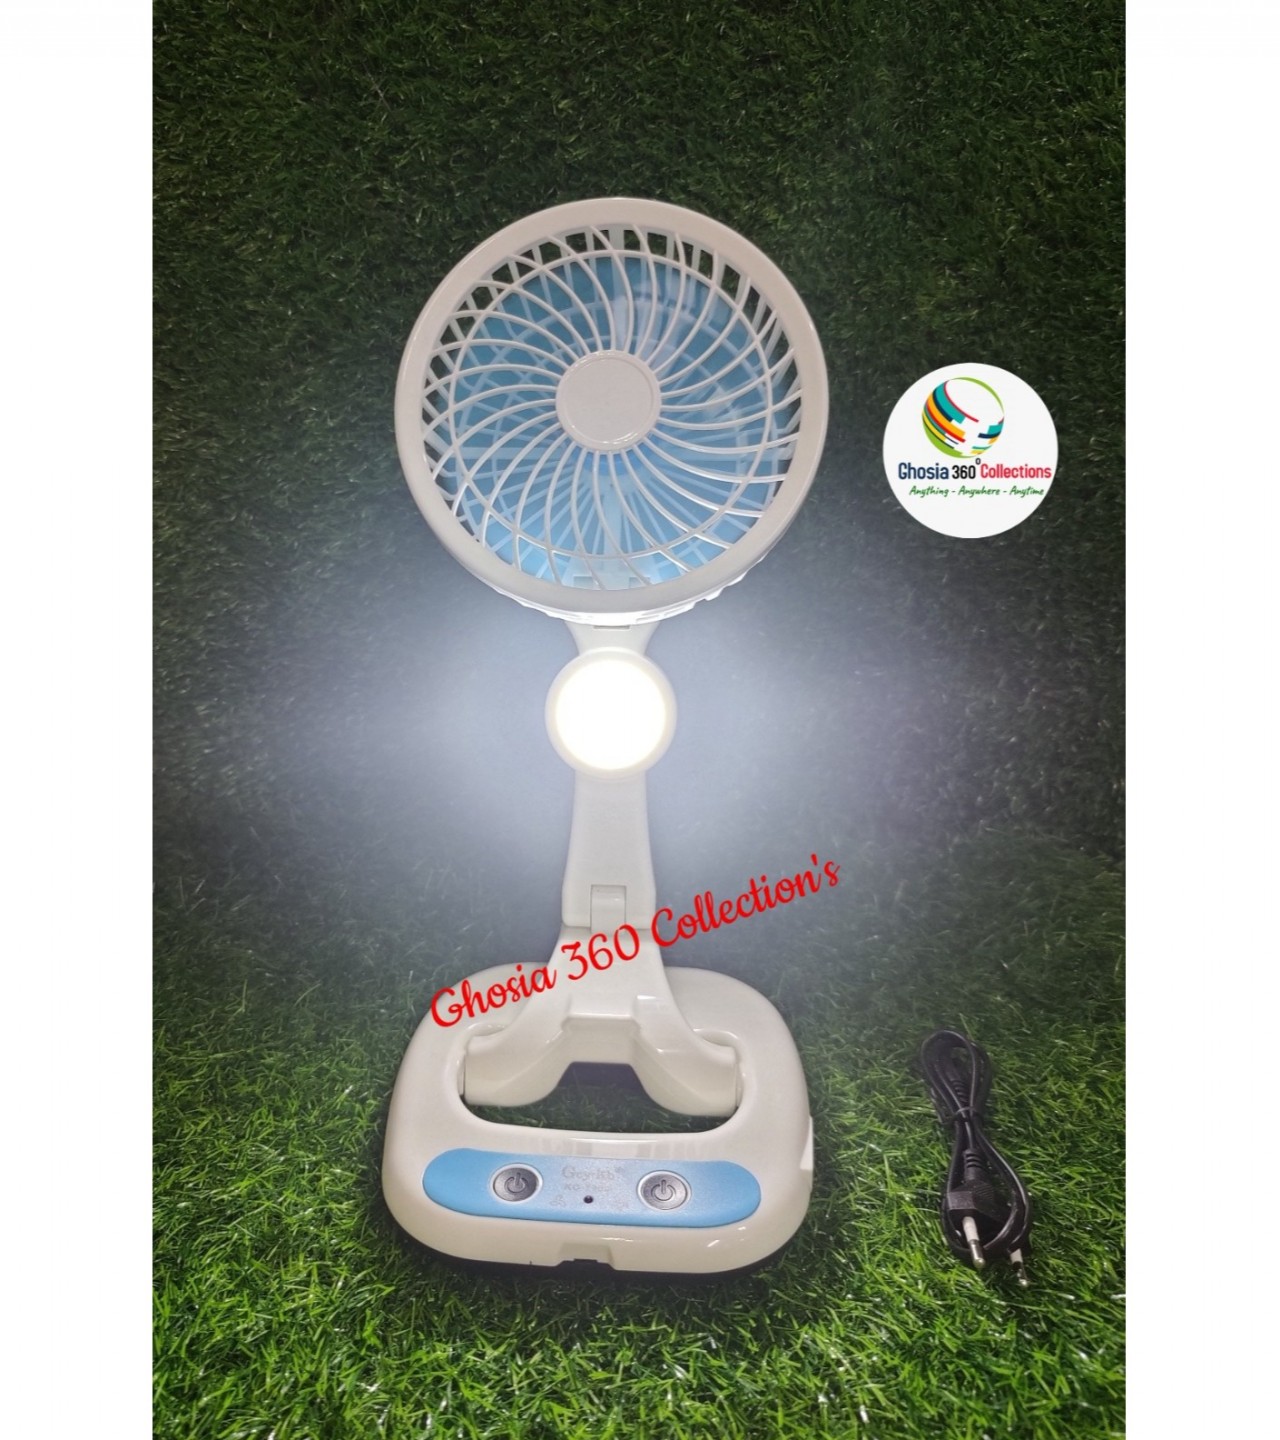 Folding Fan With Bright LED Light Table/Desk Air Cooler Variable Wind Speed & Light Brightness